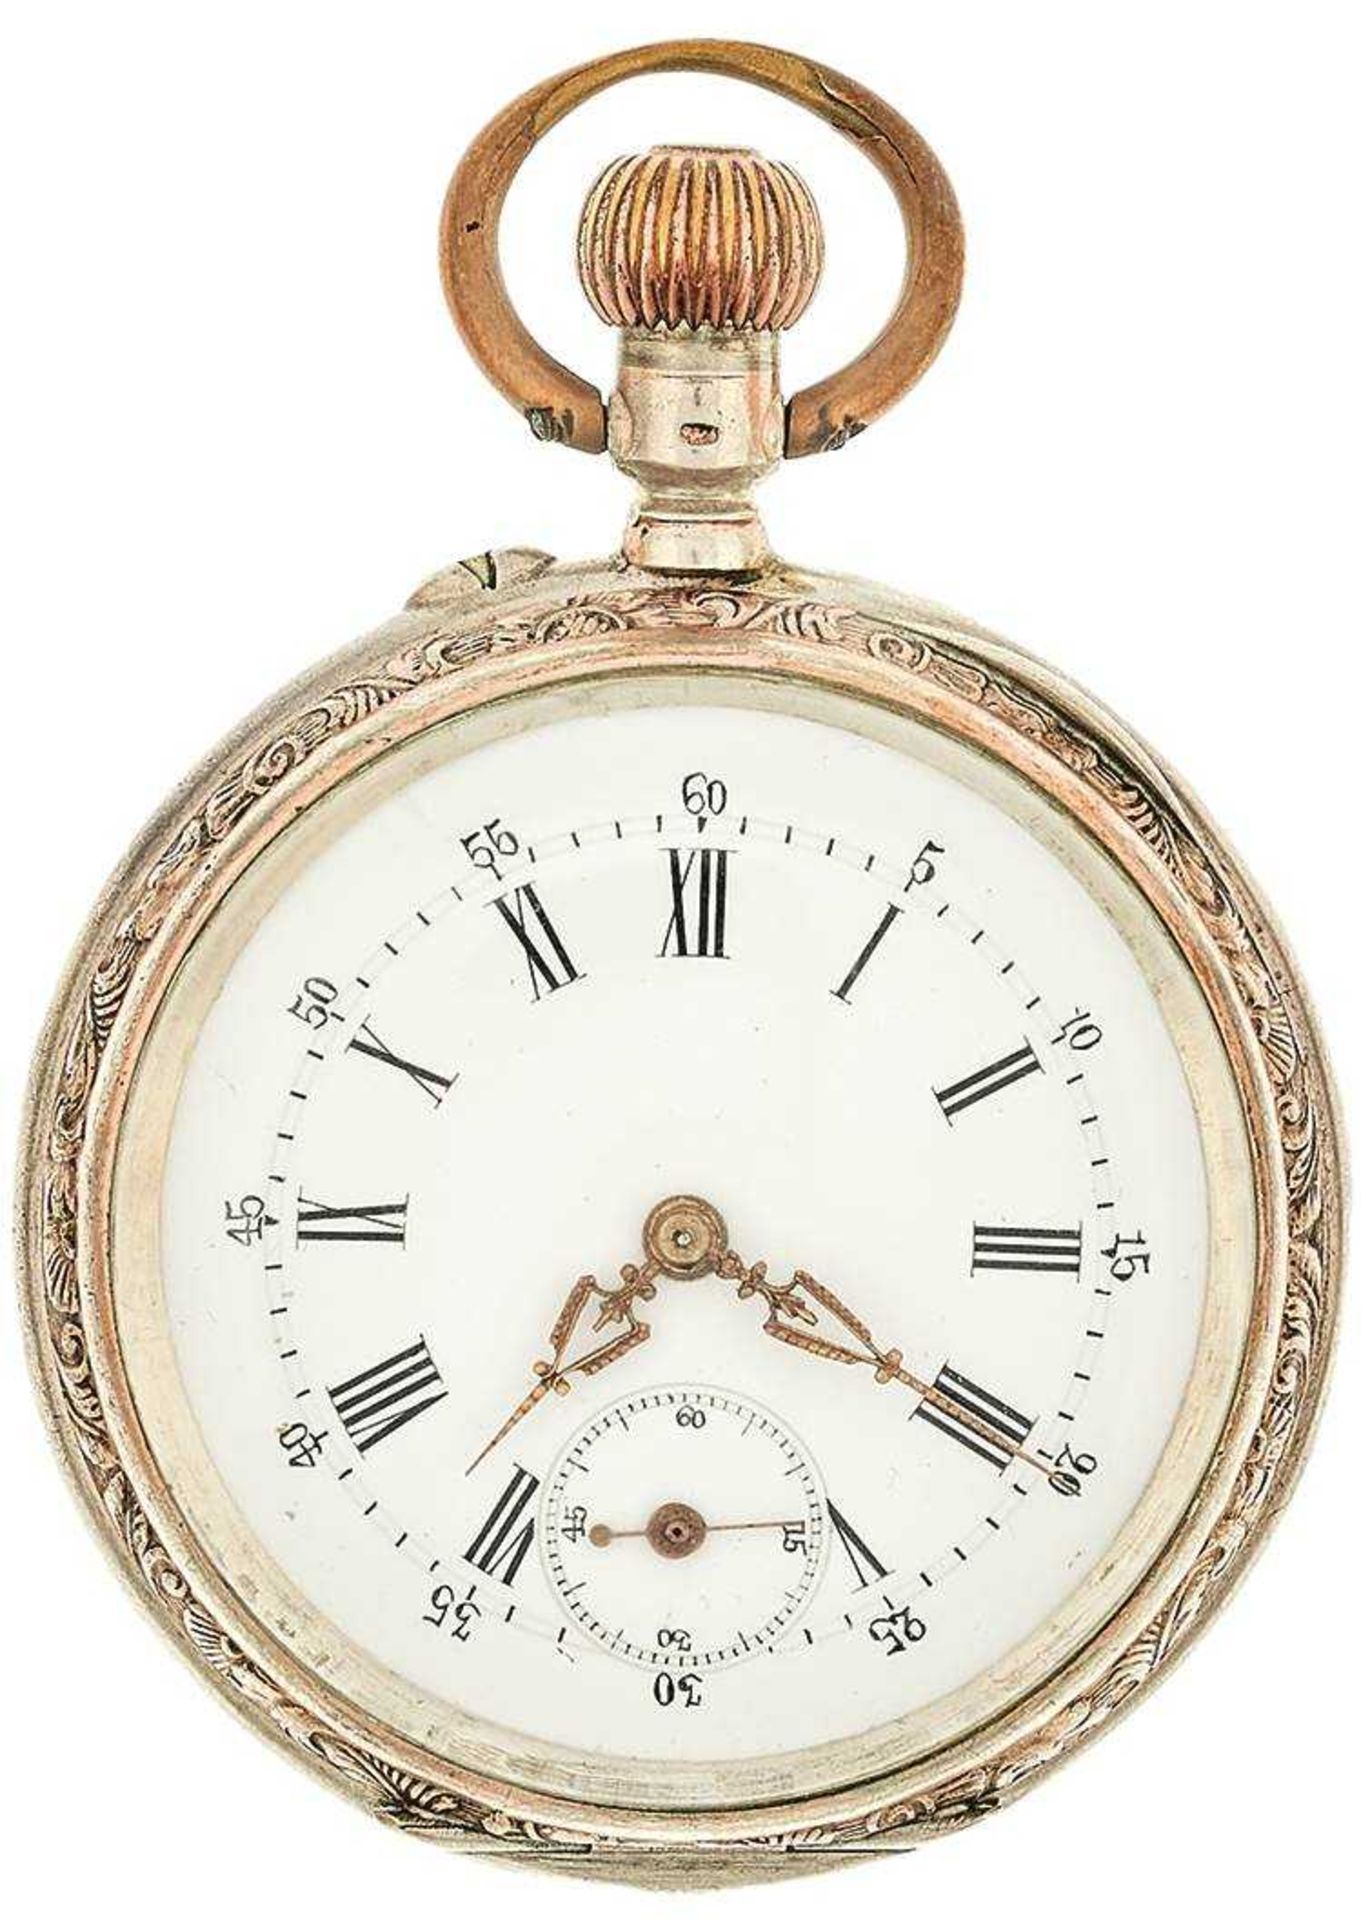 Spring cover pocket-watch \\\minerva\\\. Ca. 45 mm, about 1880-1900, Switzerland, 800er silver with